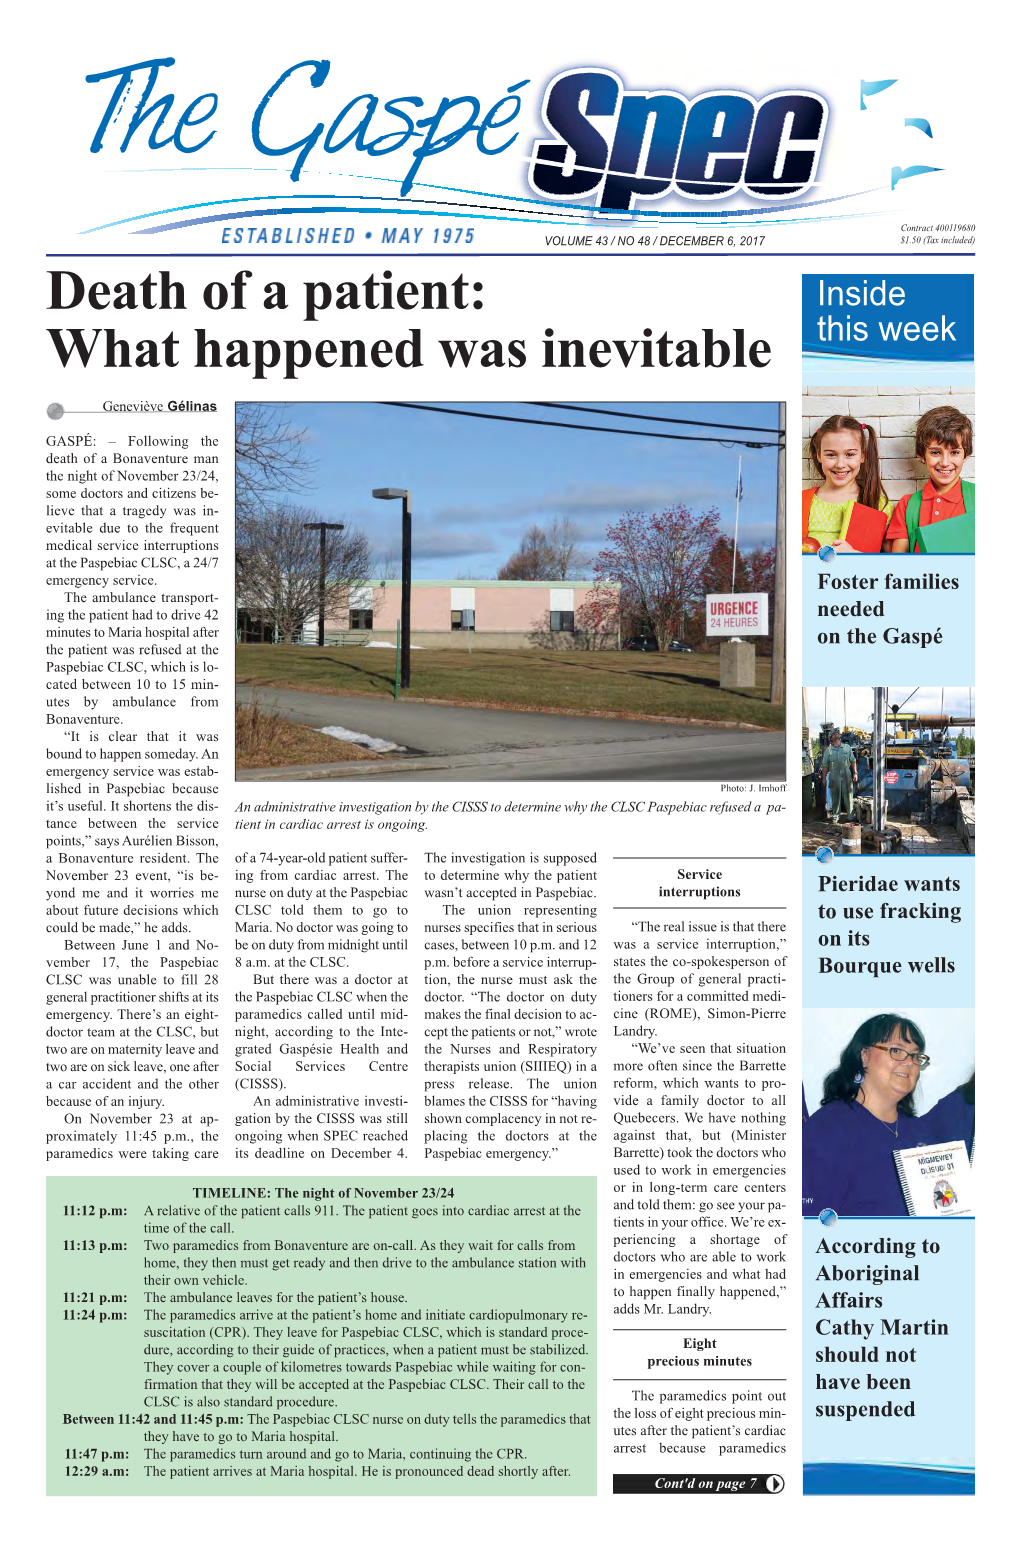 Death of a Patient: What Happened Was Inevitable